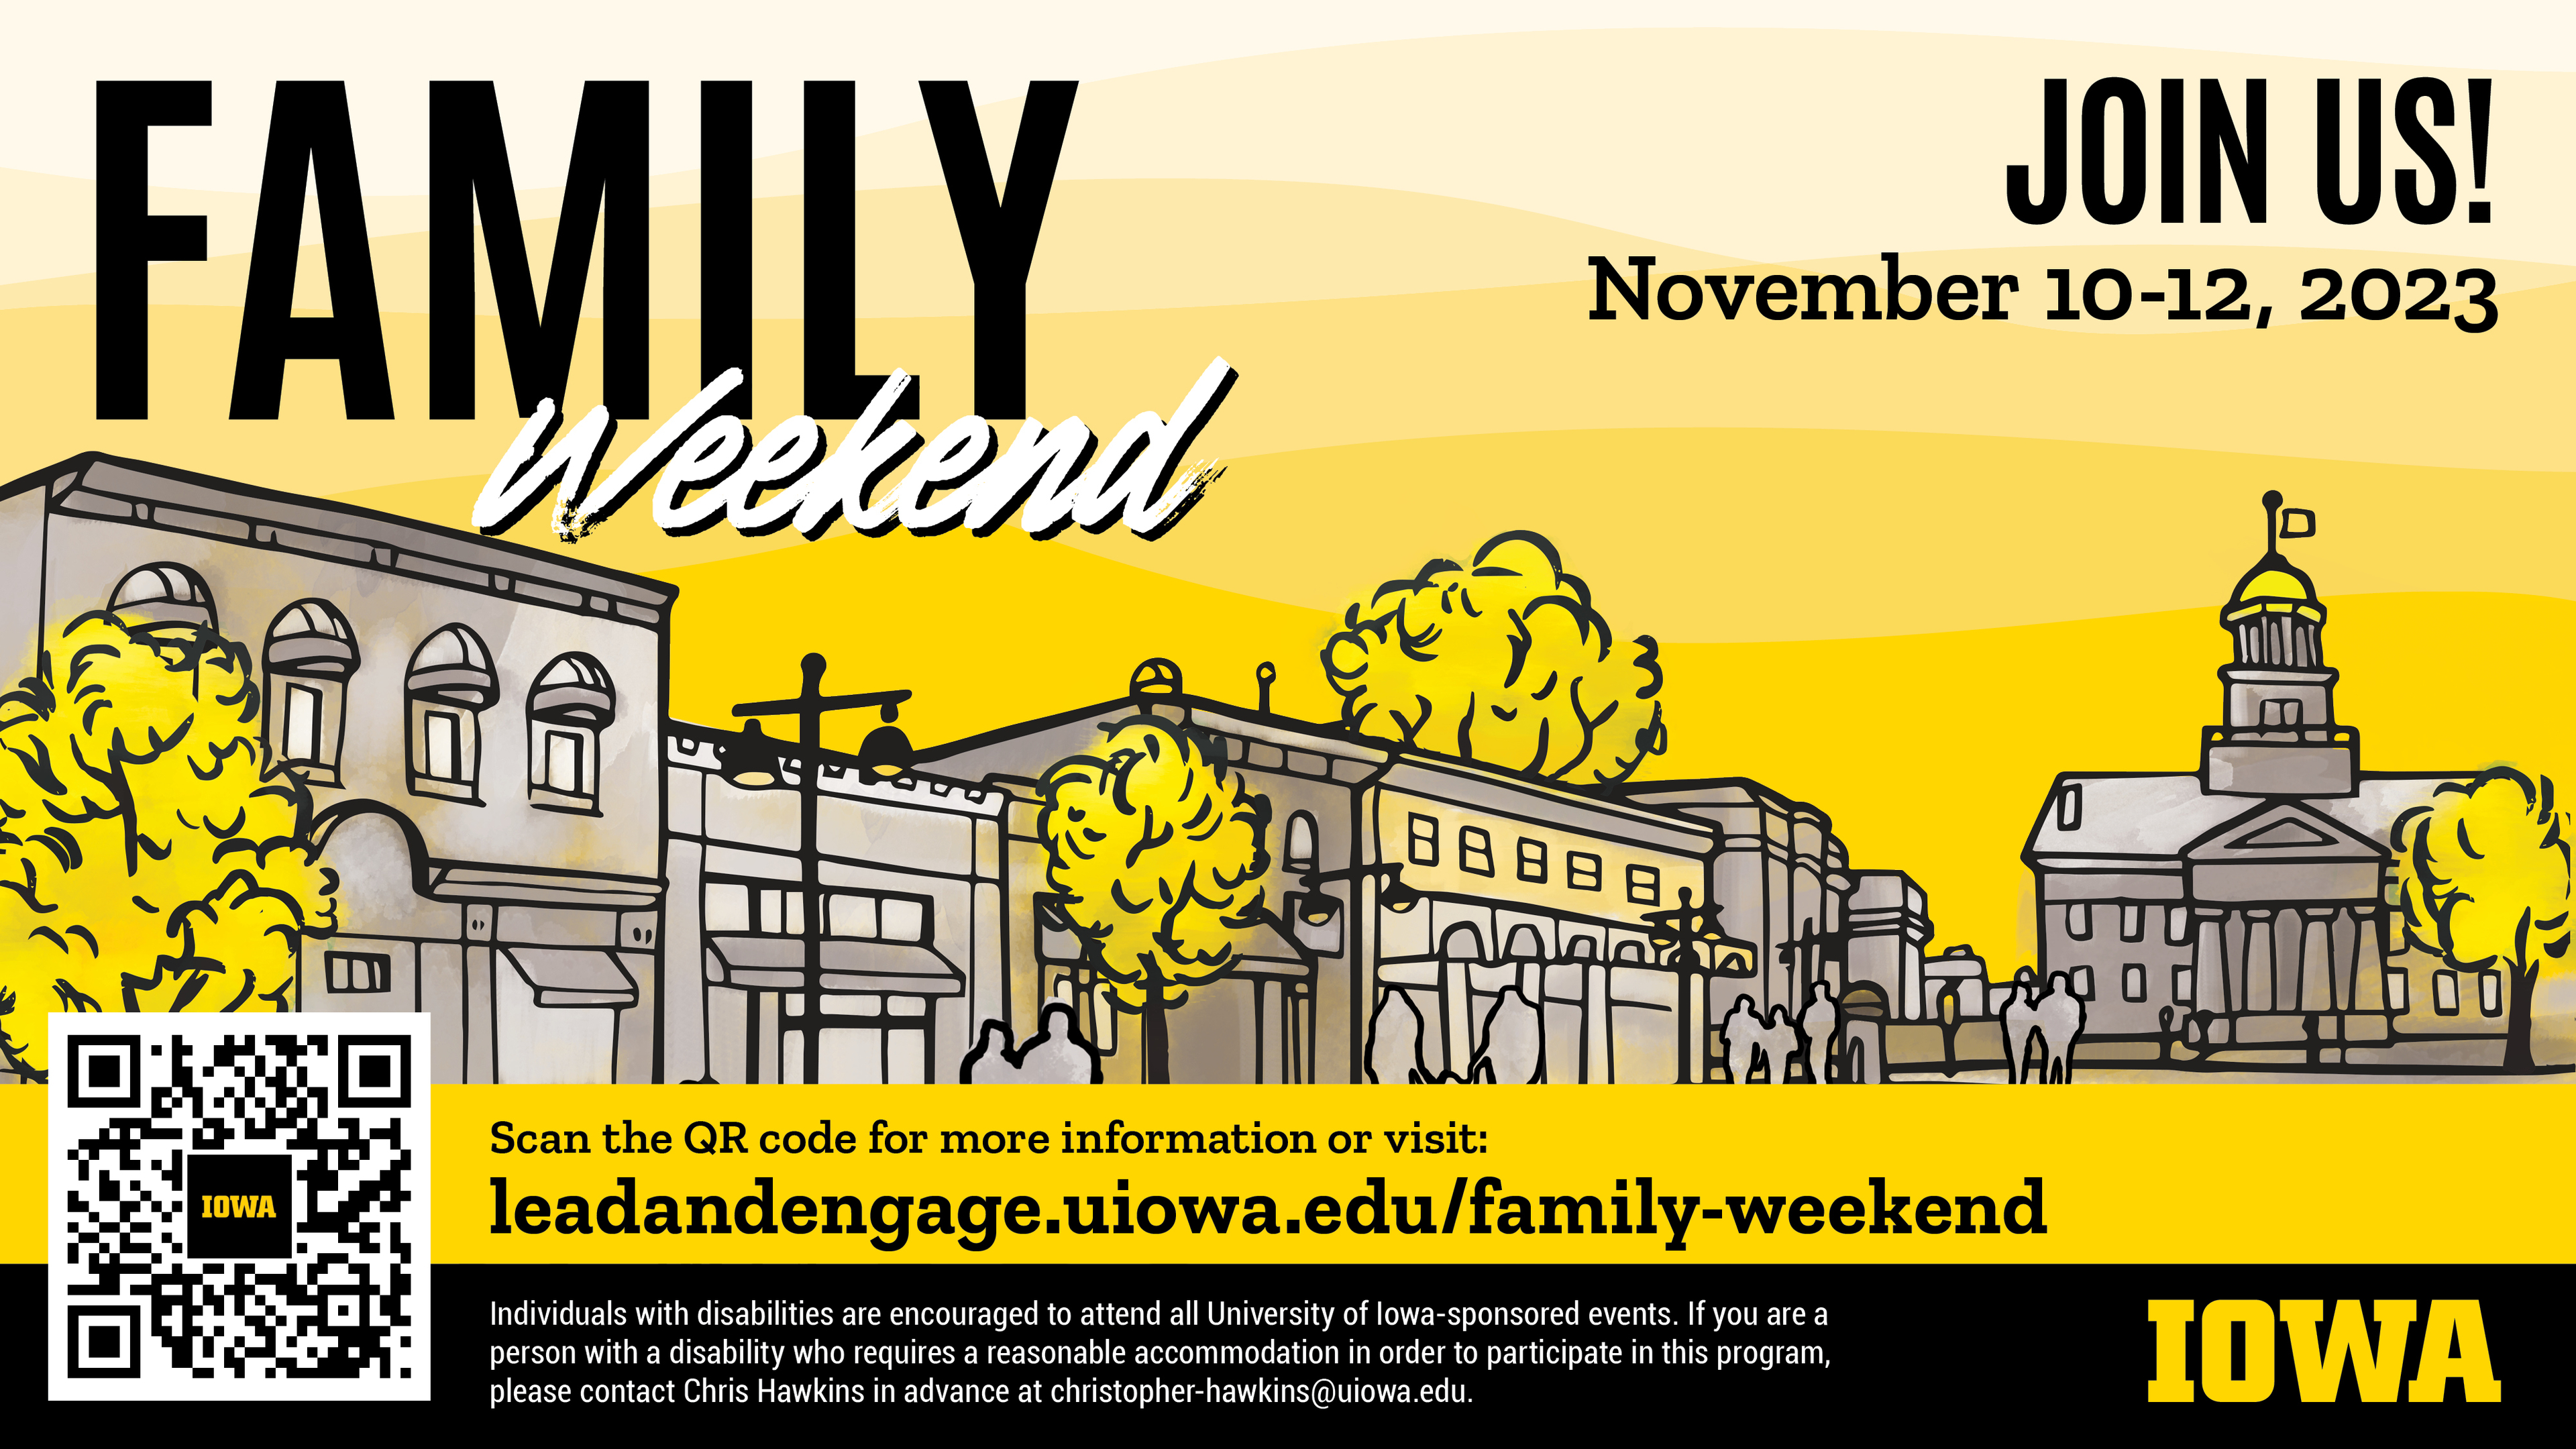 Family Weekend: Join us! November 10-12, 2023